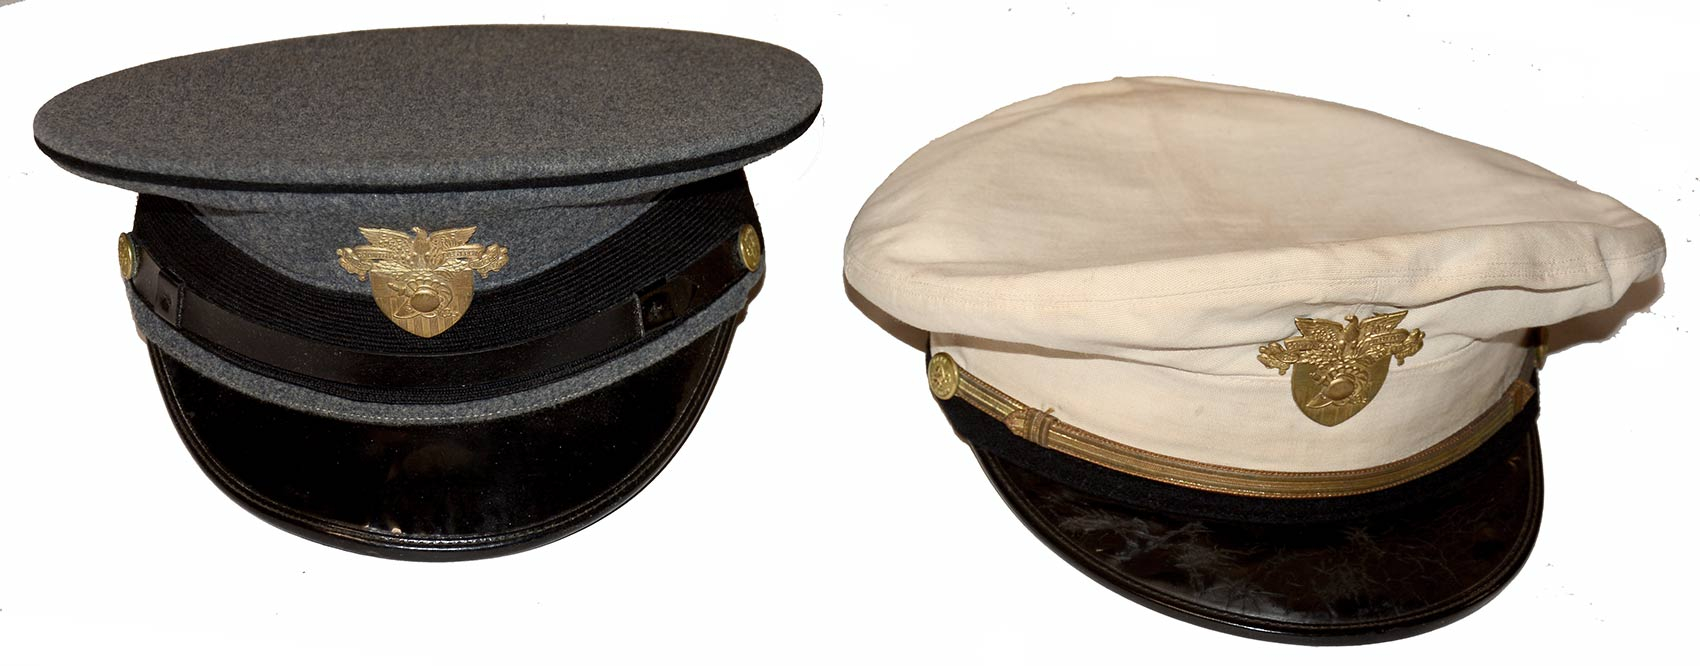 TWO WEST POINT HATS IDENTIFIED TO WILLIAM H. BIRRELL, KILLED IN THE CRASH OF A P-40 WARHAWK IN 1941